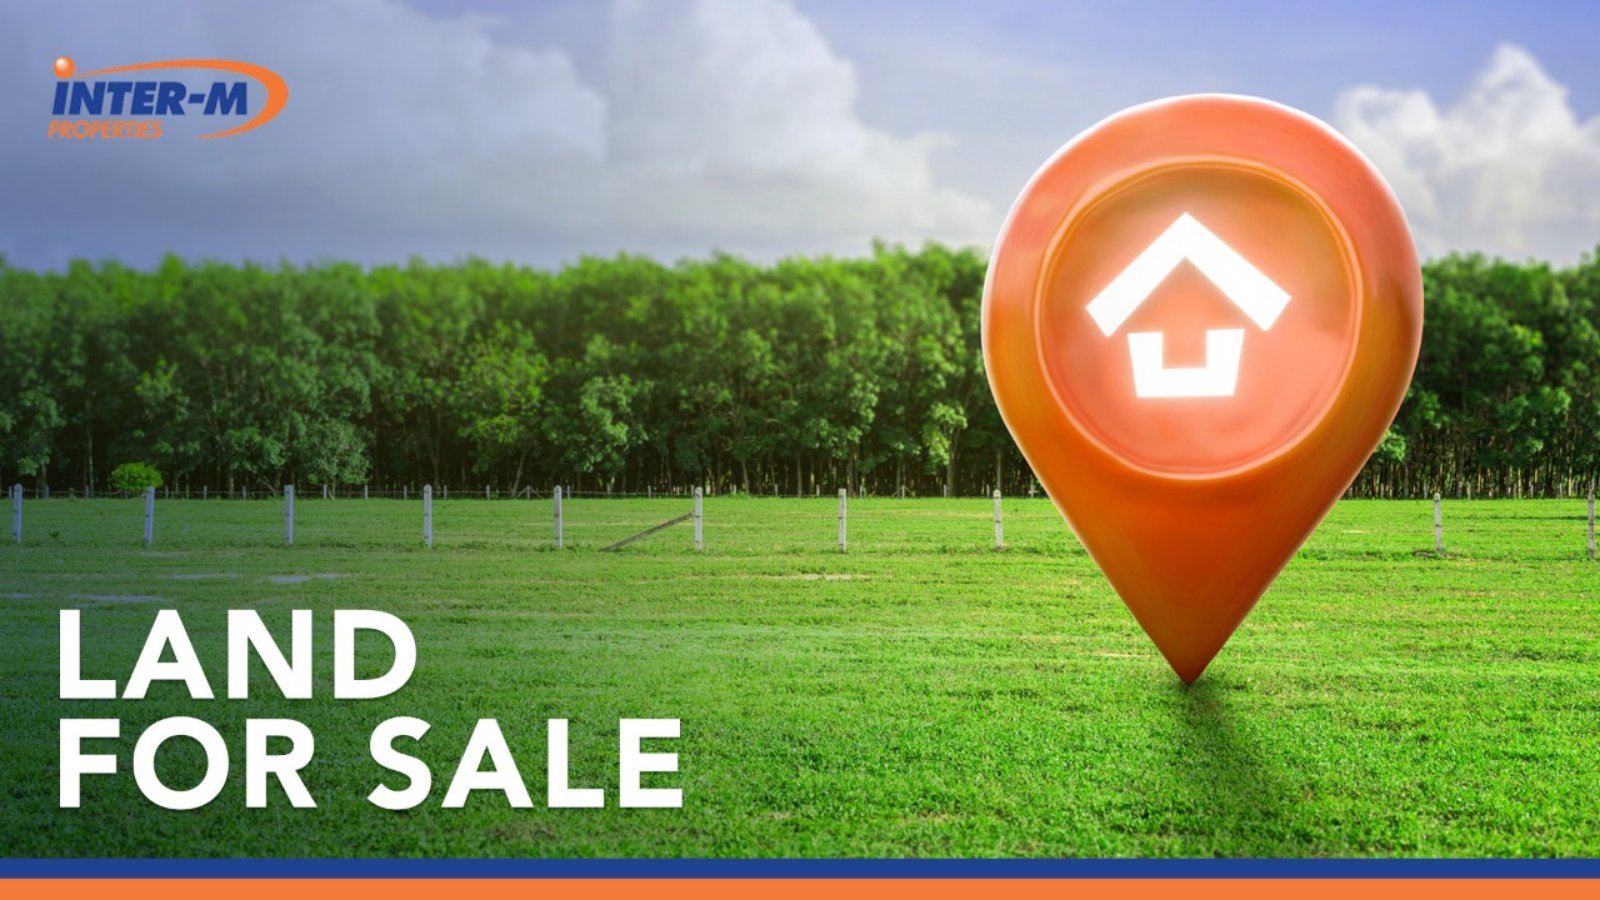 Residential Land For Sale In Pyrgos (998 sq.m)